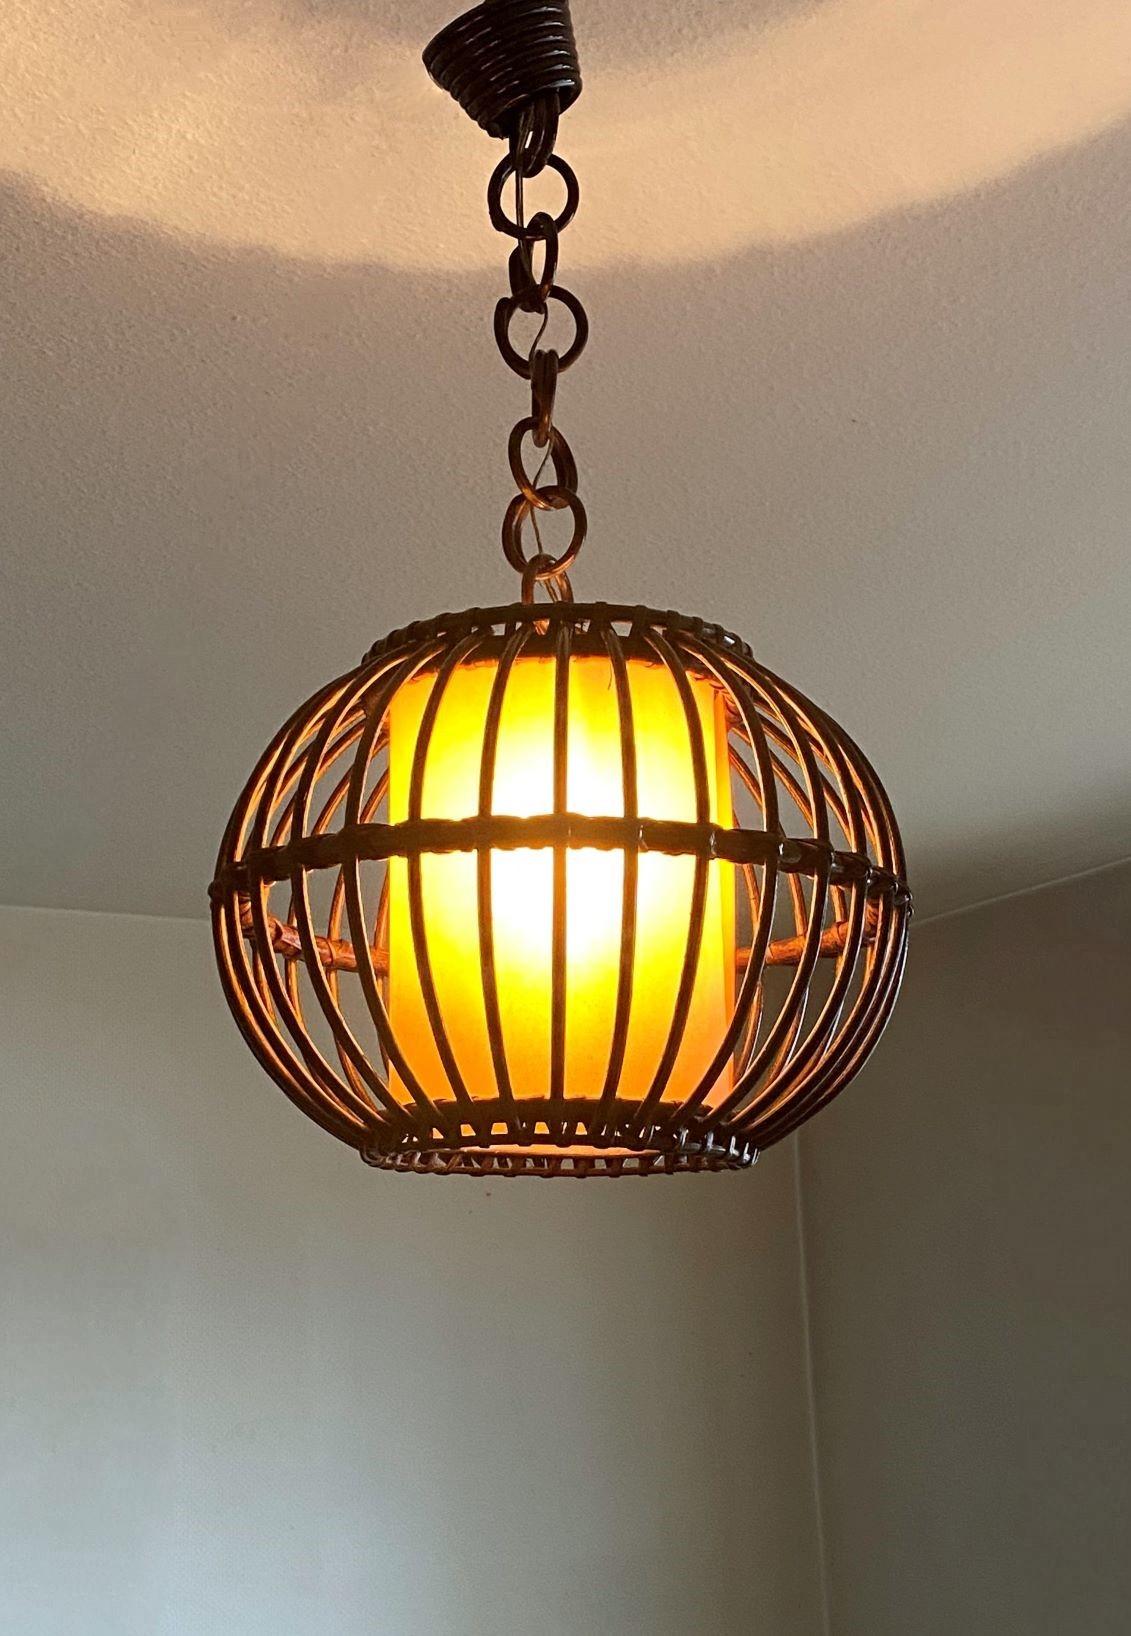 Louis Sognot Bamboo Rattan Pendant Lantern with Perchment Shade, France, 1950s For Sale 1